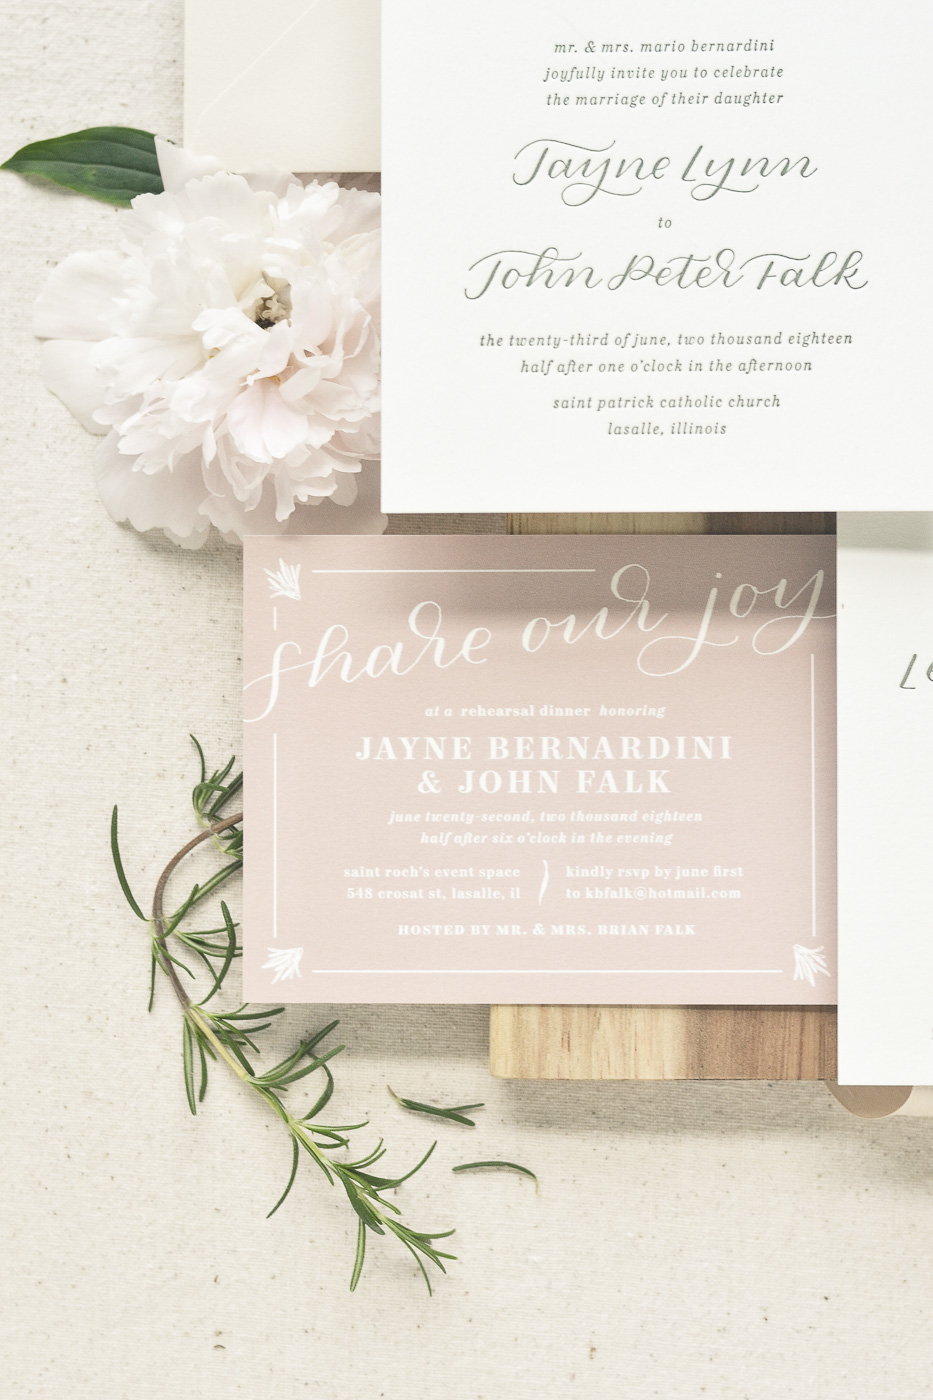 Letterpress blush and sage wedding invitations inspired by Italian rosemary | romantic summer garden wedding at Senica’s Oak Ridge Golf Club, Chicago IL | heirloom wedding stationery suites serving Detroit, Ann Arbor, and Grand Rapids, Michigan | by Paper & Honey, www.paperandhoney.com / #weddinginvites #weddinginspiration #weddingday #letterpress #chicagowedding